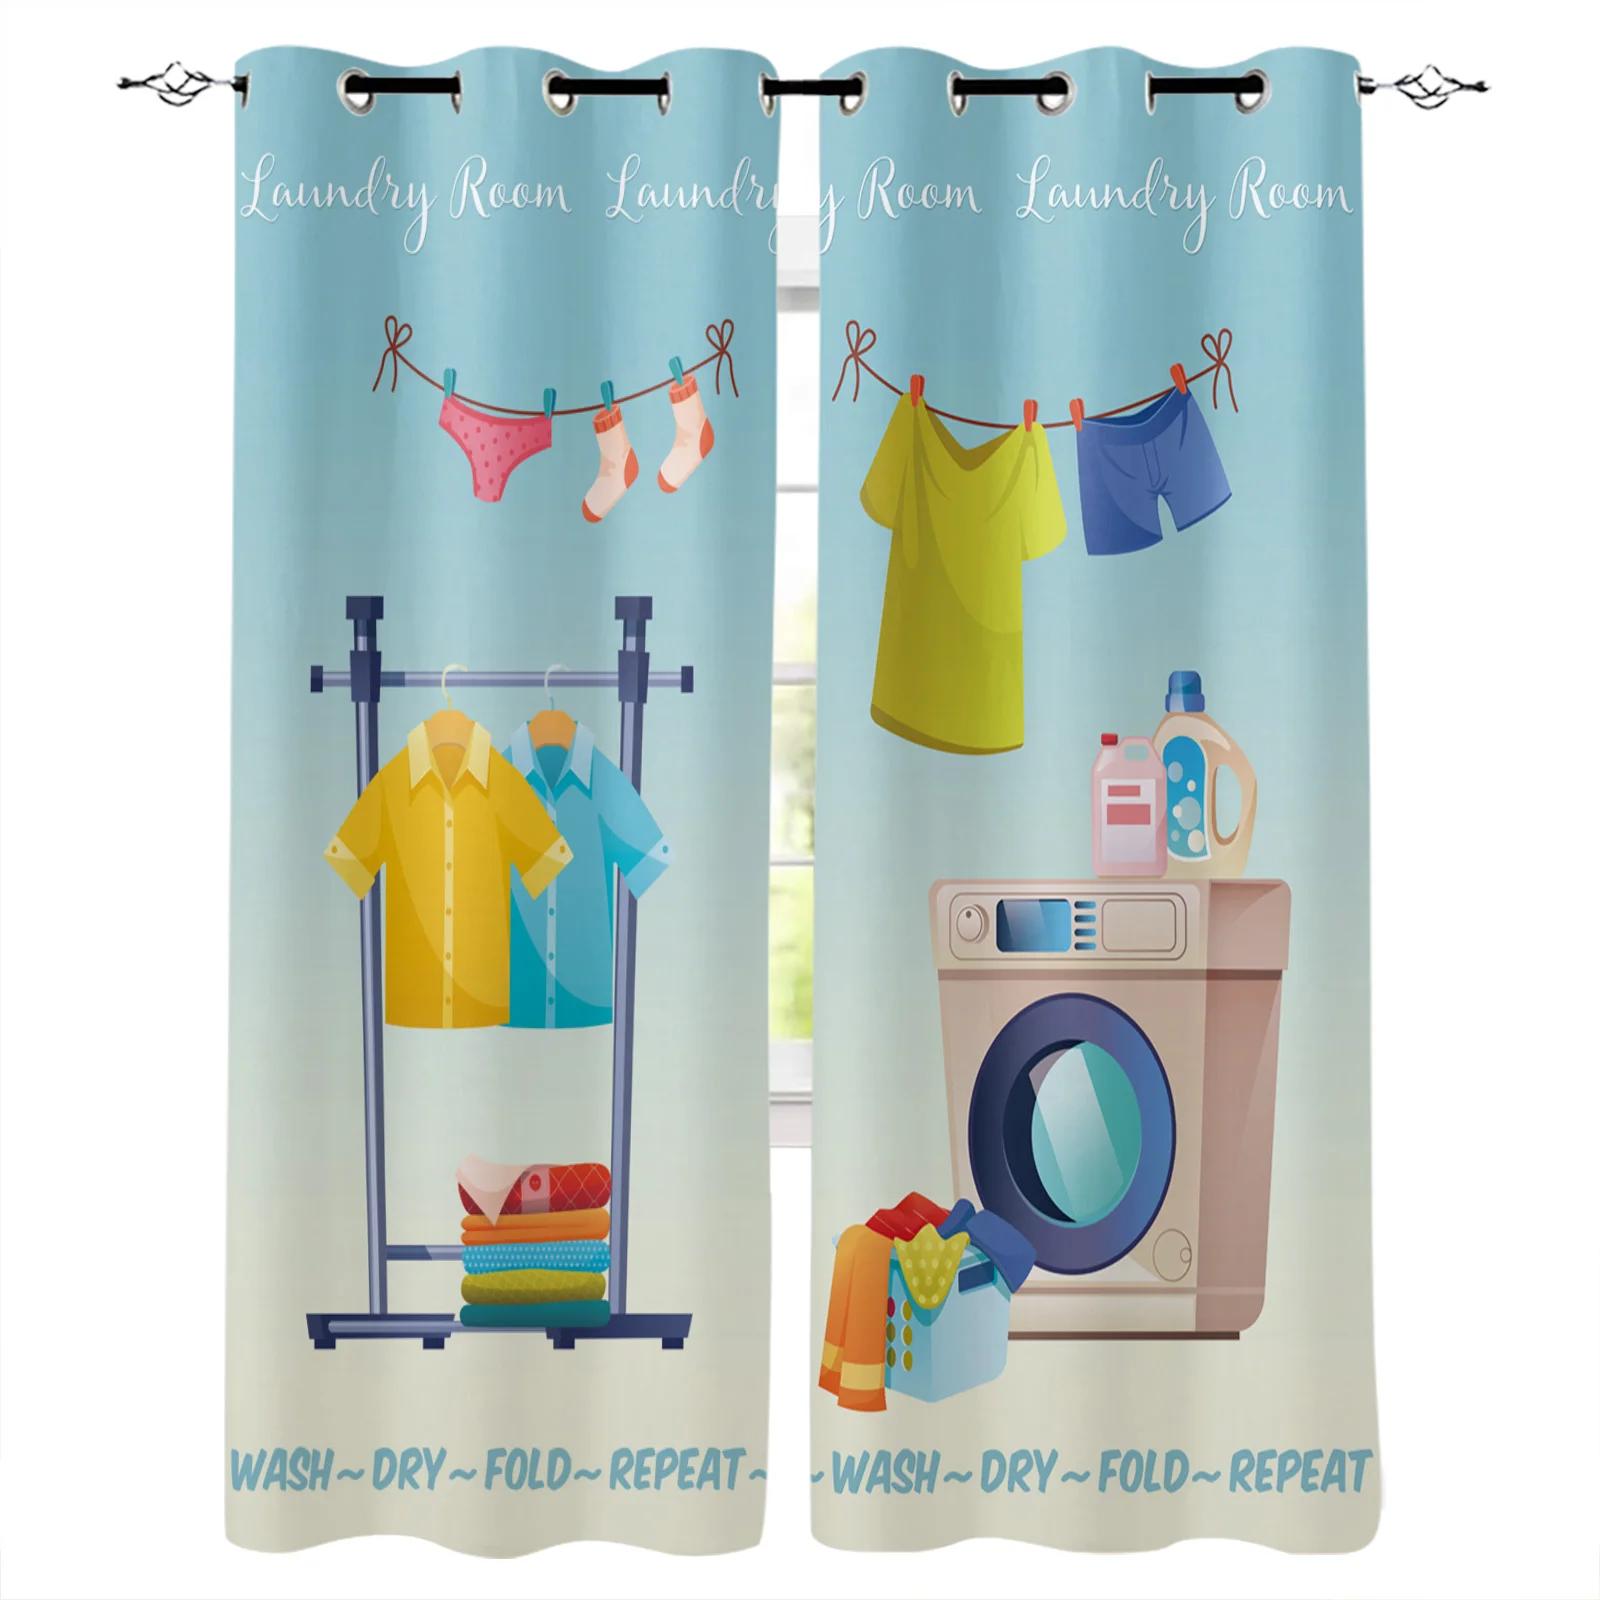 Laundry Room Washing Machine Clothes Drying Text Curtains Drapes For Living Room Bedroom Kitchen Office Blinds Windo